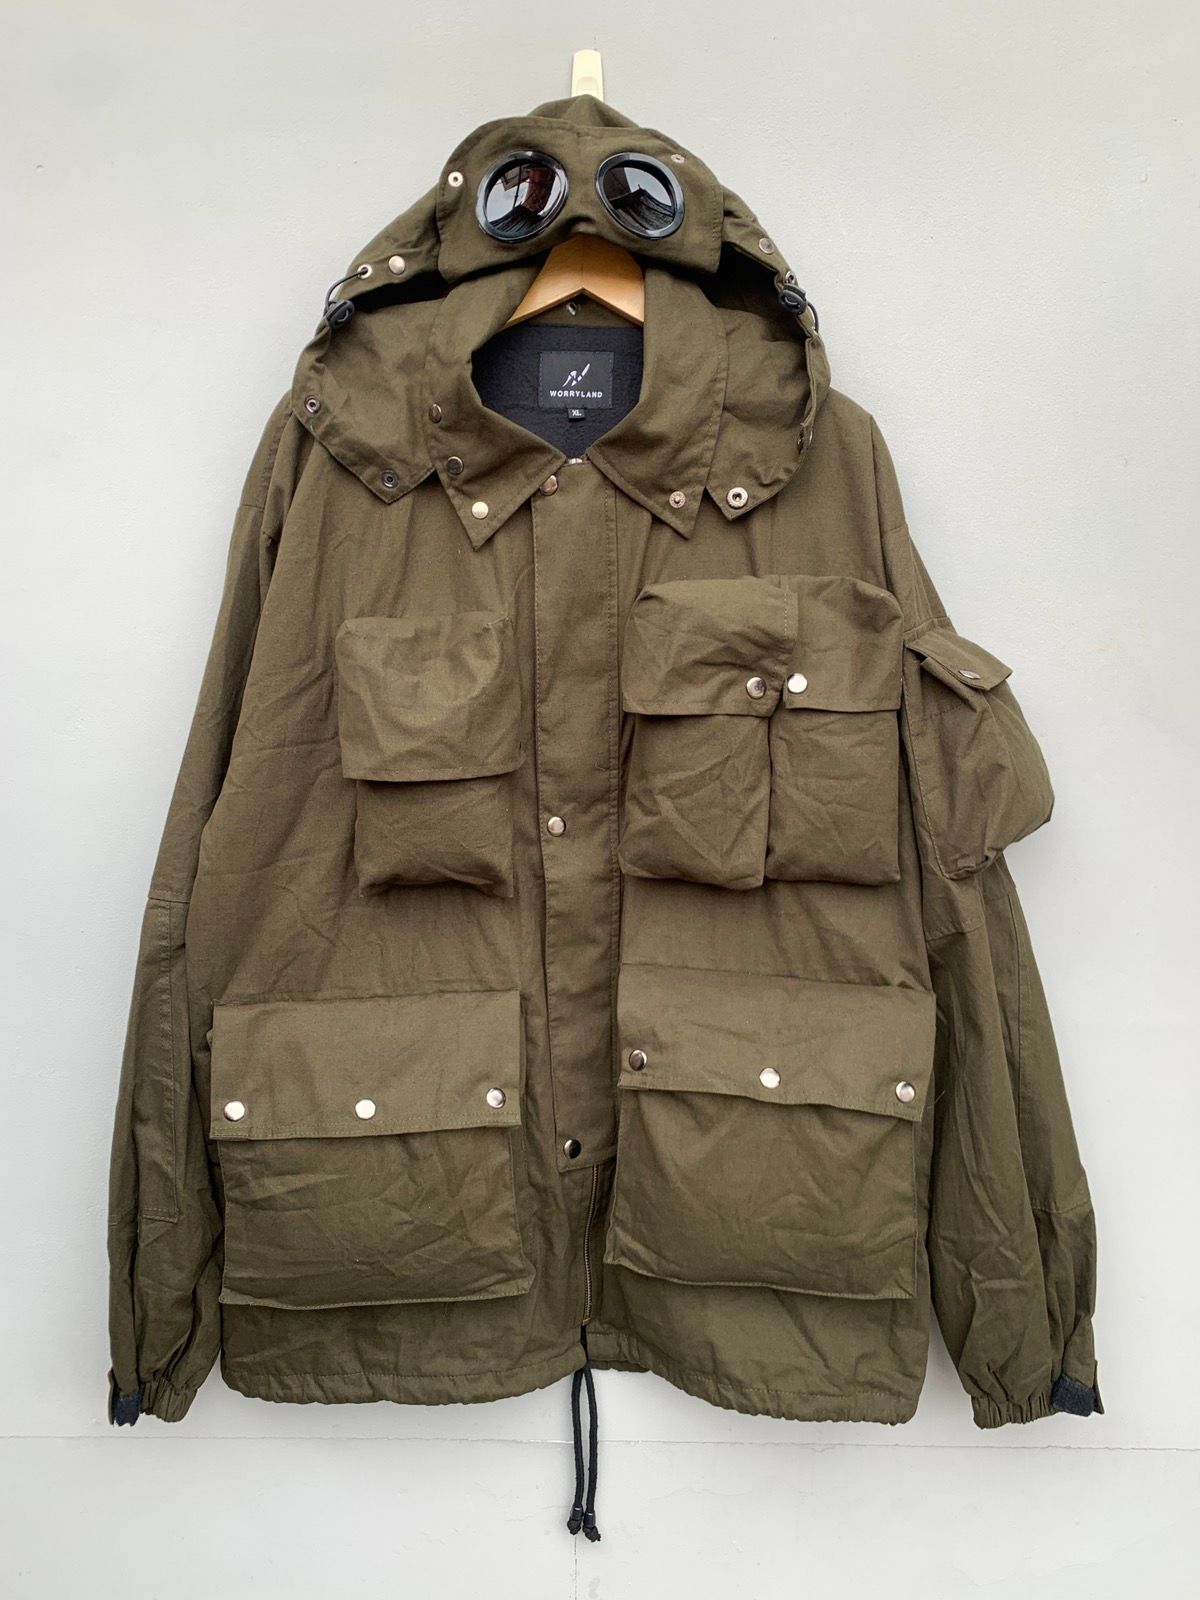 Vintage Goggle Jacket by Worryland Look Like CP Company Mille Miglia ...